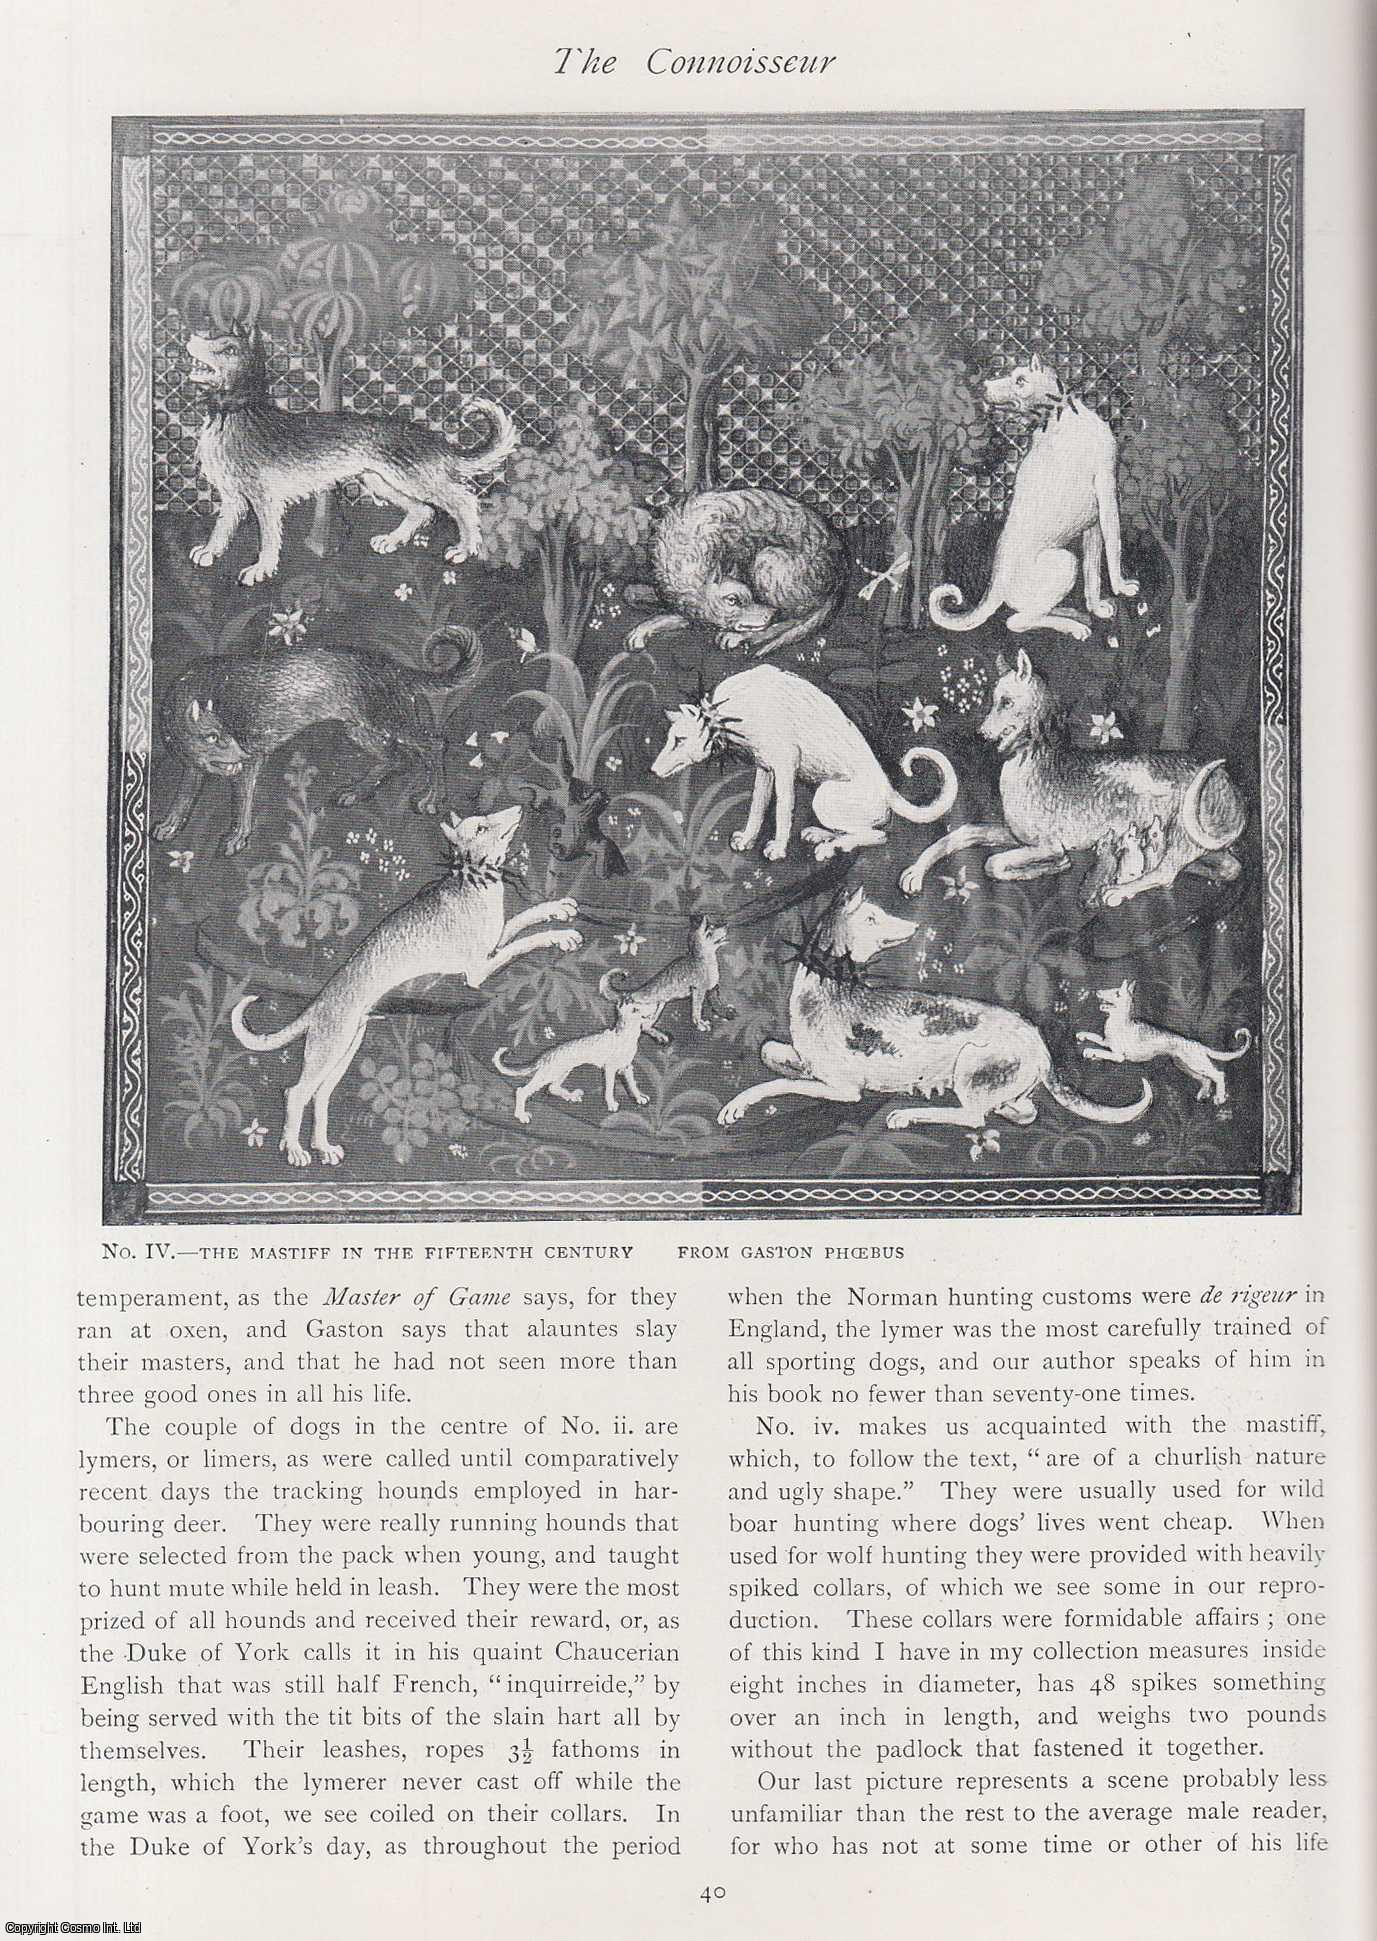 W.A. Baillie-Grohman - Fifteenth Century Sporting Dogs. An original article from The Connoisseur, 1904.